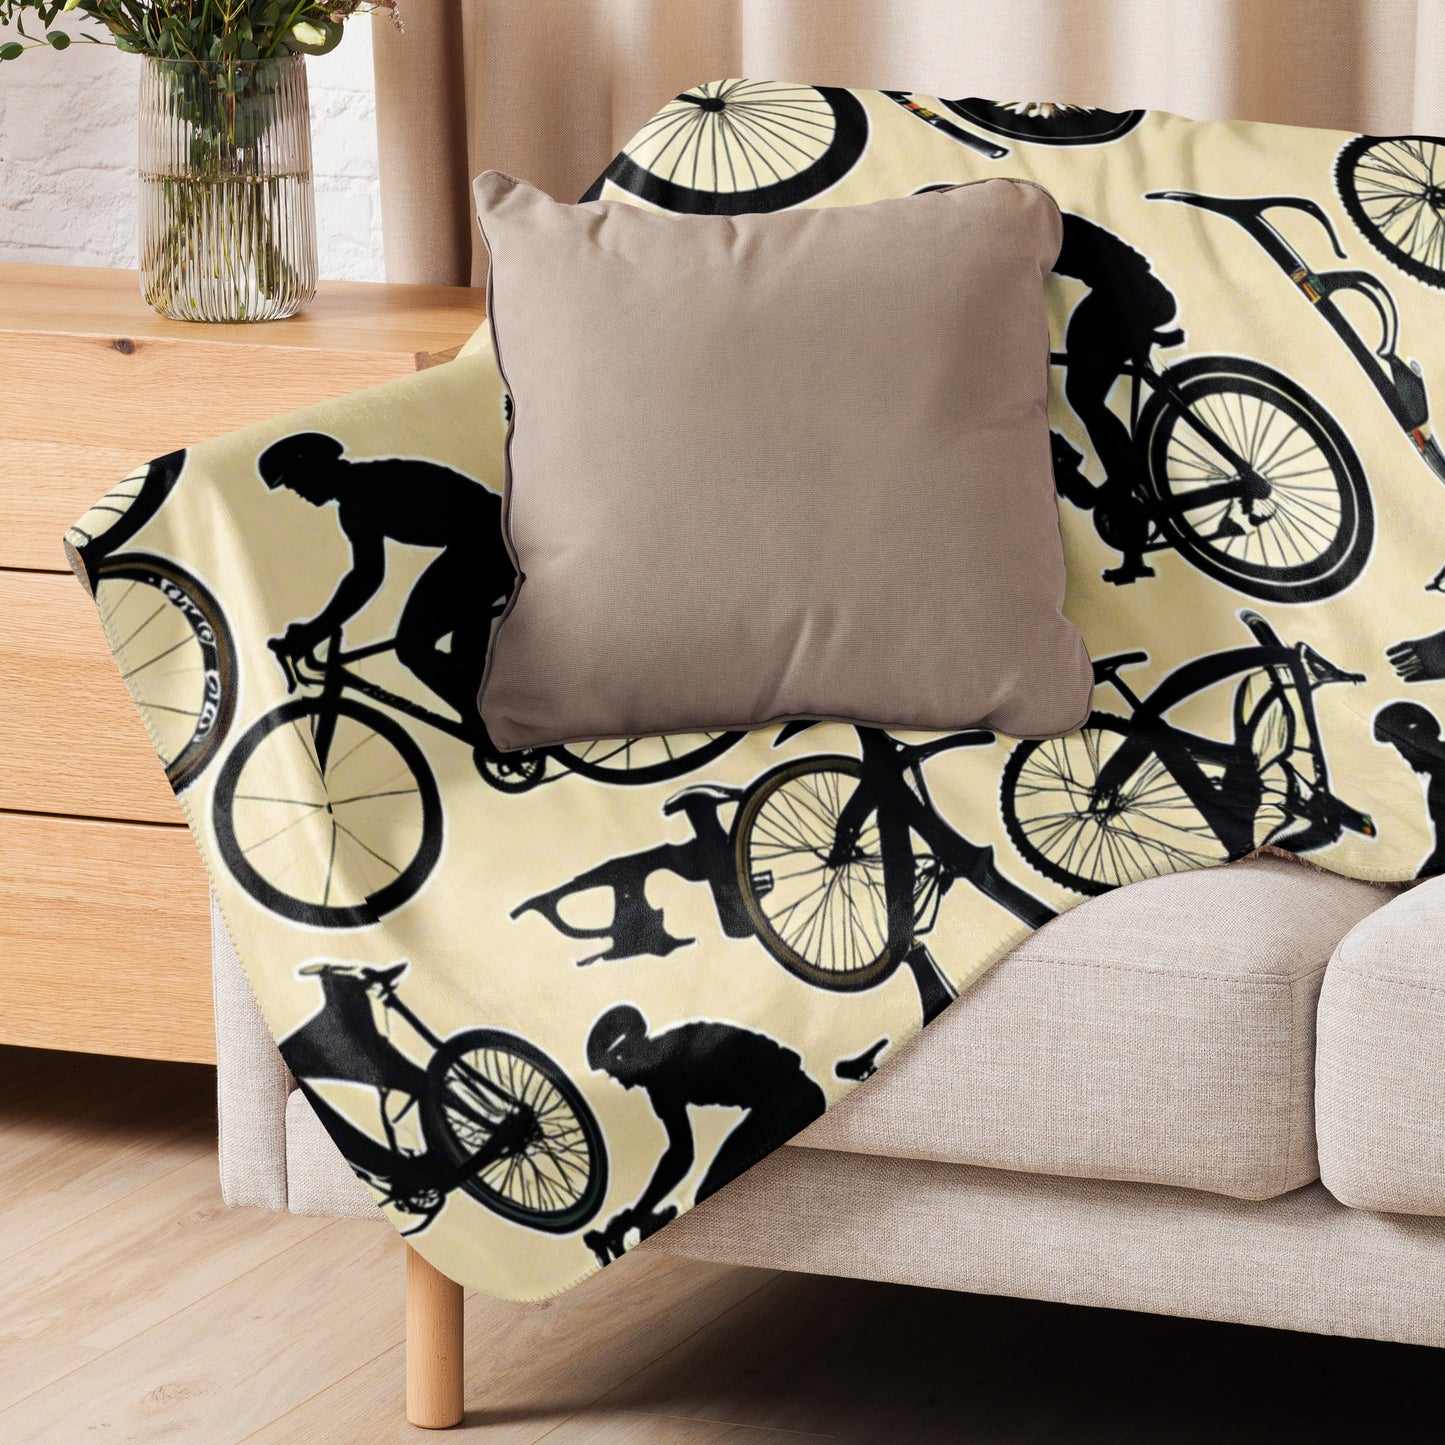 Cyclist Sherpa Blanket, Colorful Cyclist Blanket Gift